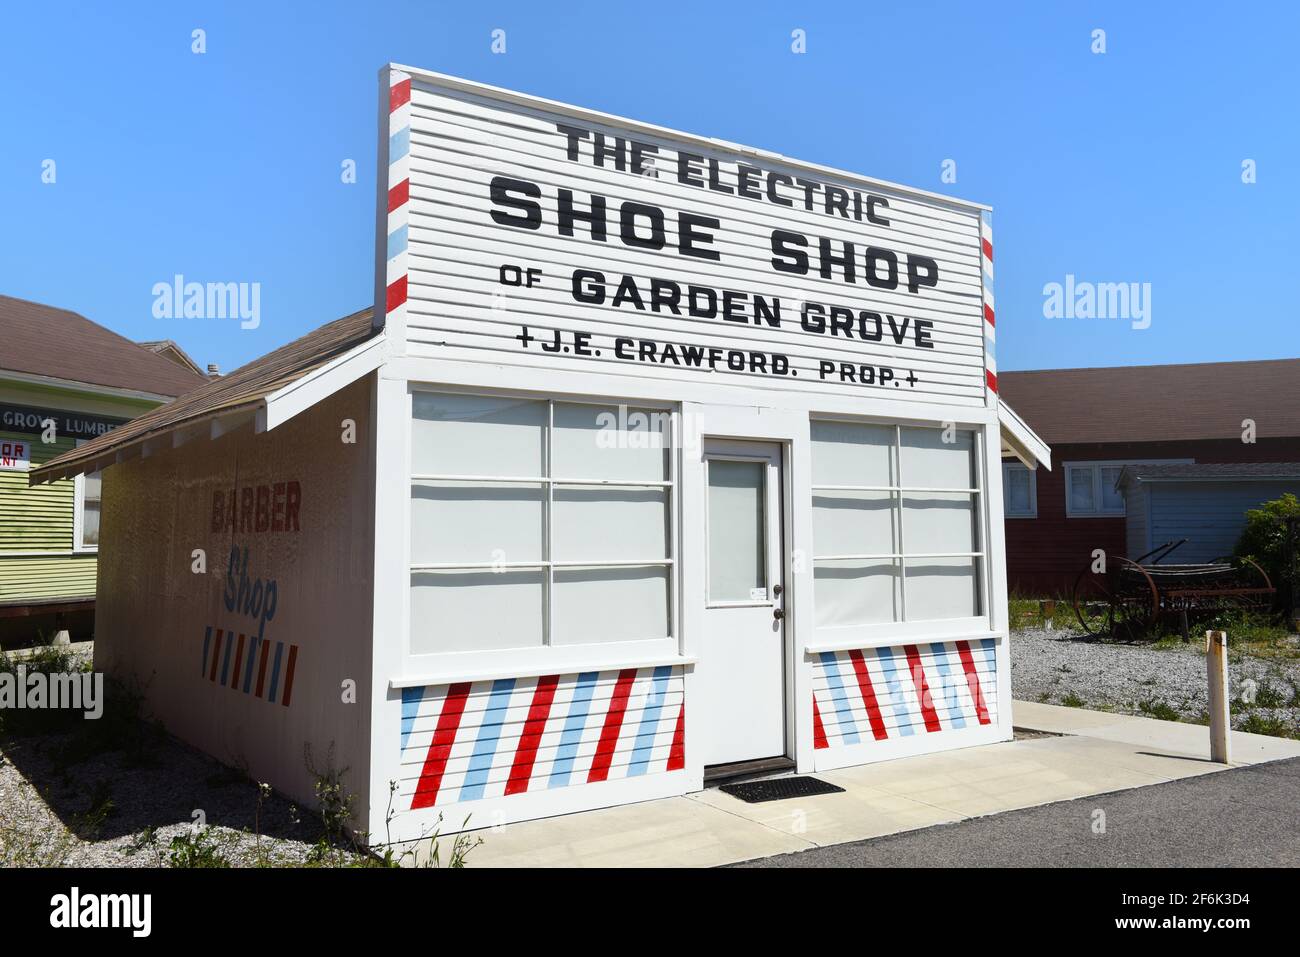 GARDEN GROVE, CALIFORNIA - 31 MAR 2021: The Electric Shoe Shop building at the Stanley Ranch Museum. Stock Photo